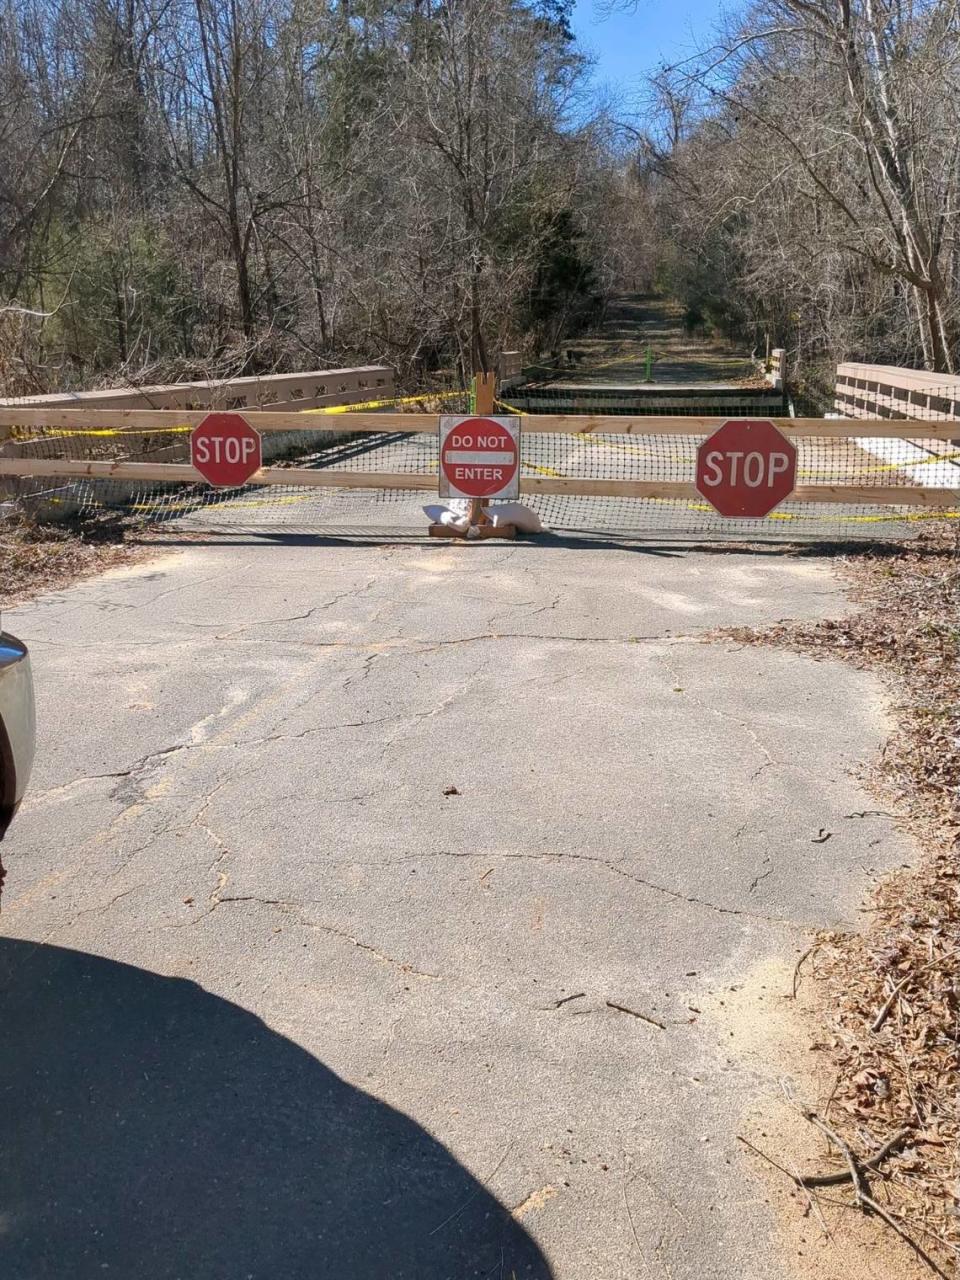 Stop signs warn pedestrians near the collapsed road bridge on Anne Springs Close Greenway property in Fort Mill.